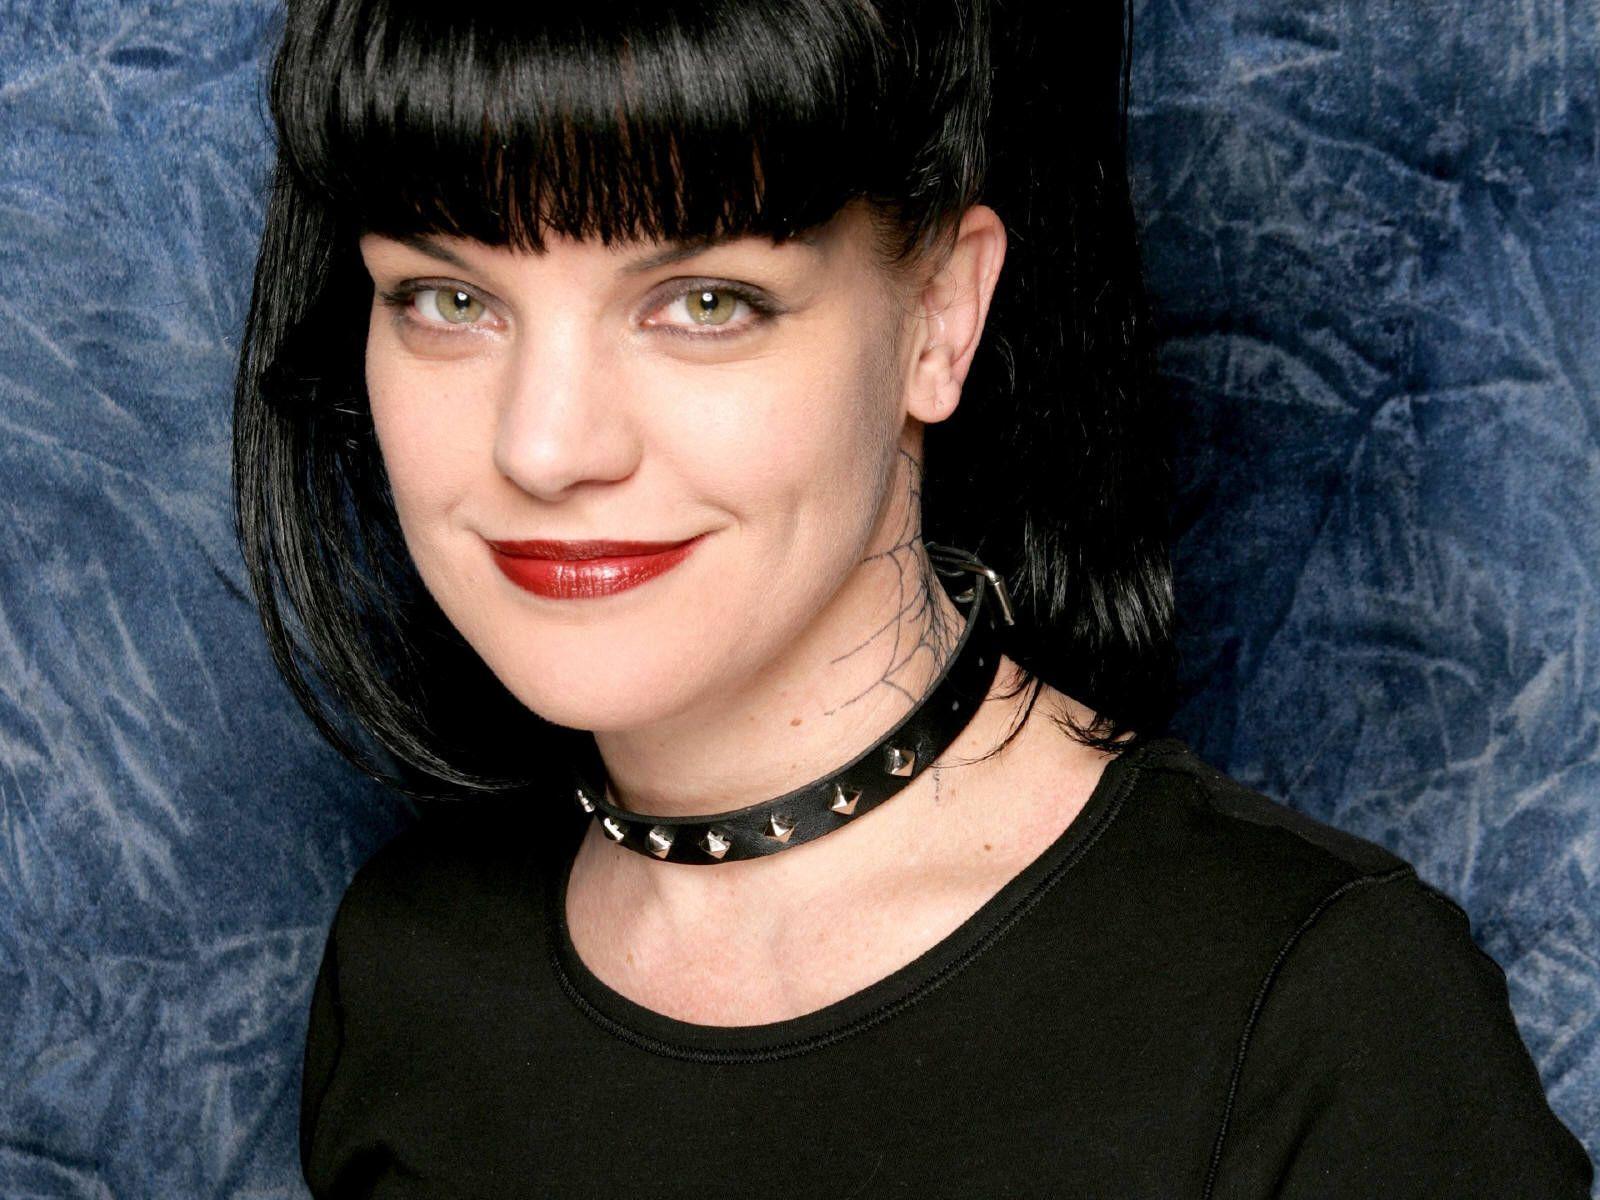 Pauley Perrette Weight And Height, Measurements, Bra Size